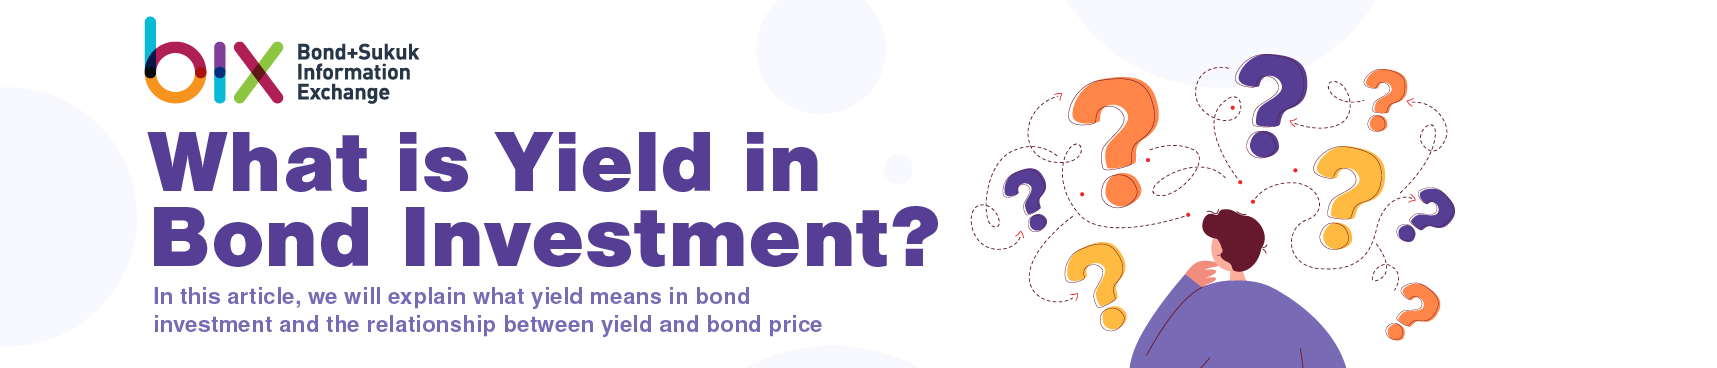 What is Yield in Bond Investment?